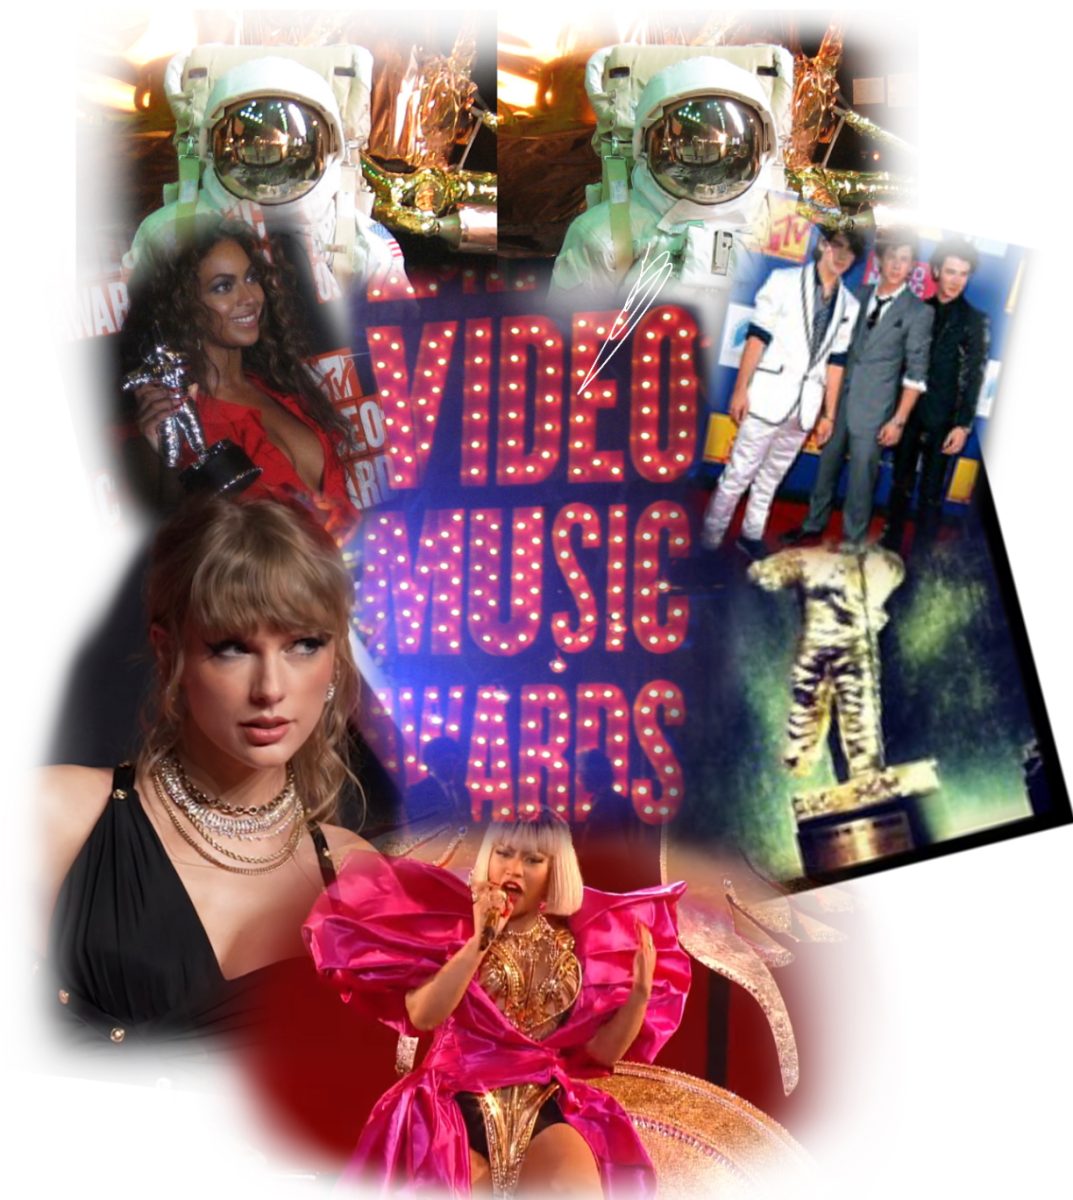 This+collage+of+multiple+celebrities+features+many+of+those+who+have+attended+the+VMAs+in+the+past.+%28Photo+Illustration%29++